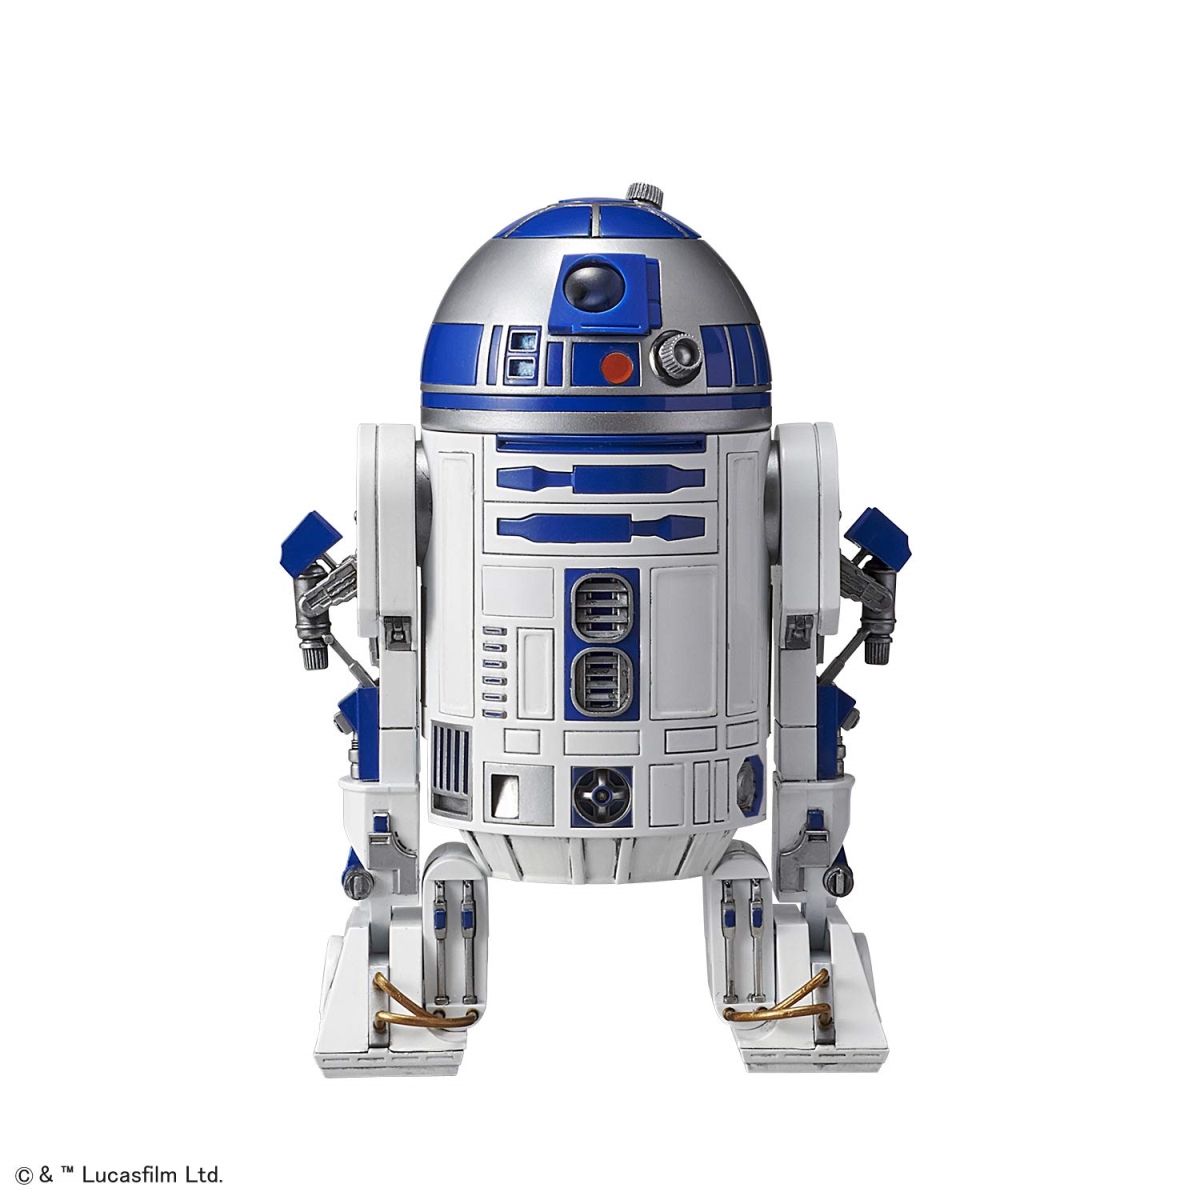 Bas5055339 1 By 12 Scale R2-d2 Model Kit From Star Wars